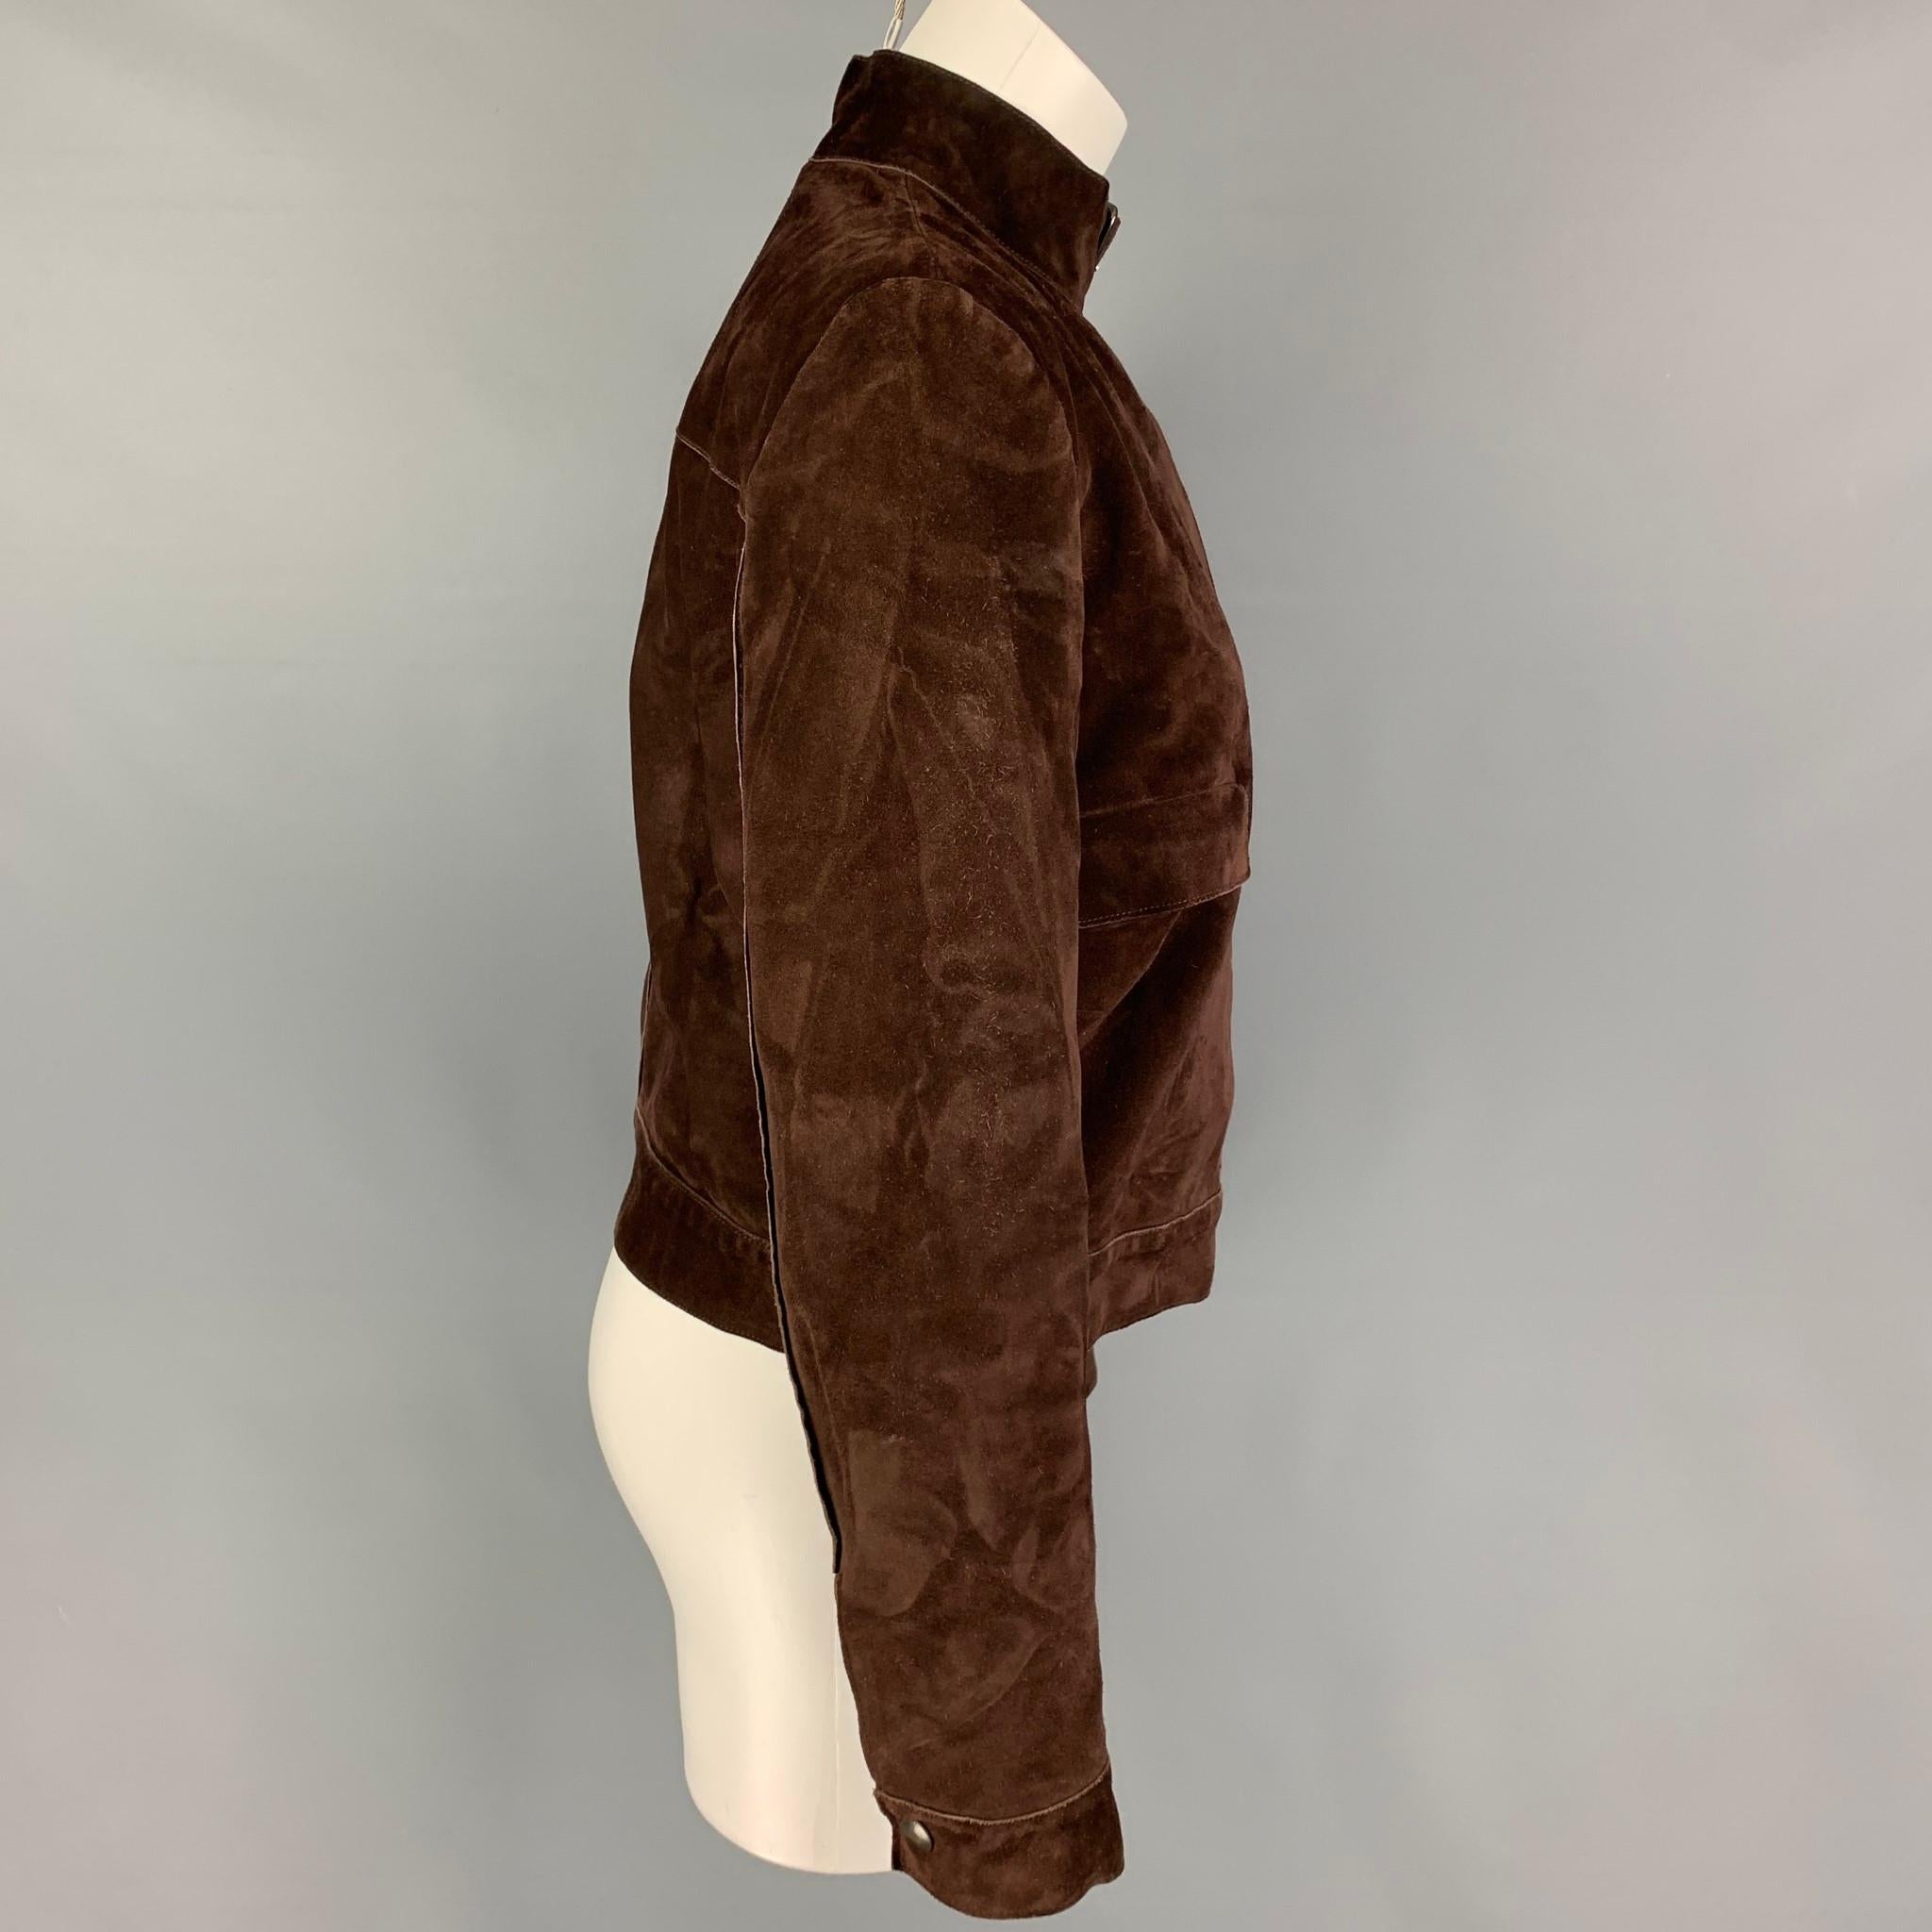 MIU MIU jacket comes in a brown suede with a full liner featuring a belted strap collar, flap pockets, and a snap button closure. Made in Italy. 

Good Pre-Owned Condition. Fabric tag removed.
Marked: 42

Measurements:

Shoulder: 16 in.
Bust: 38